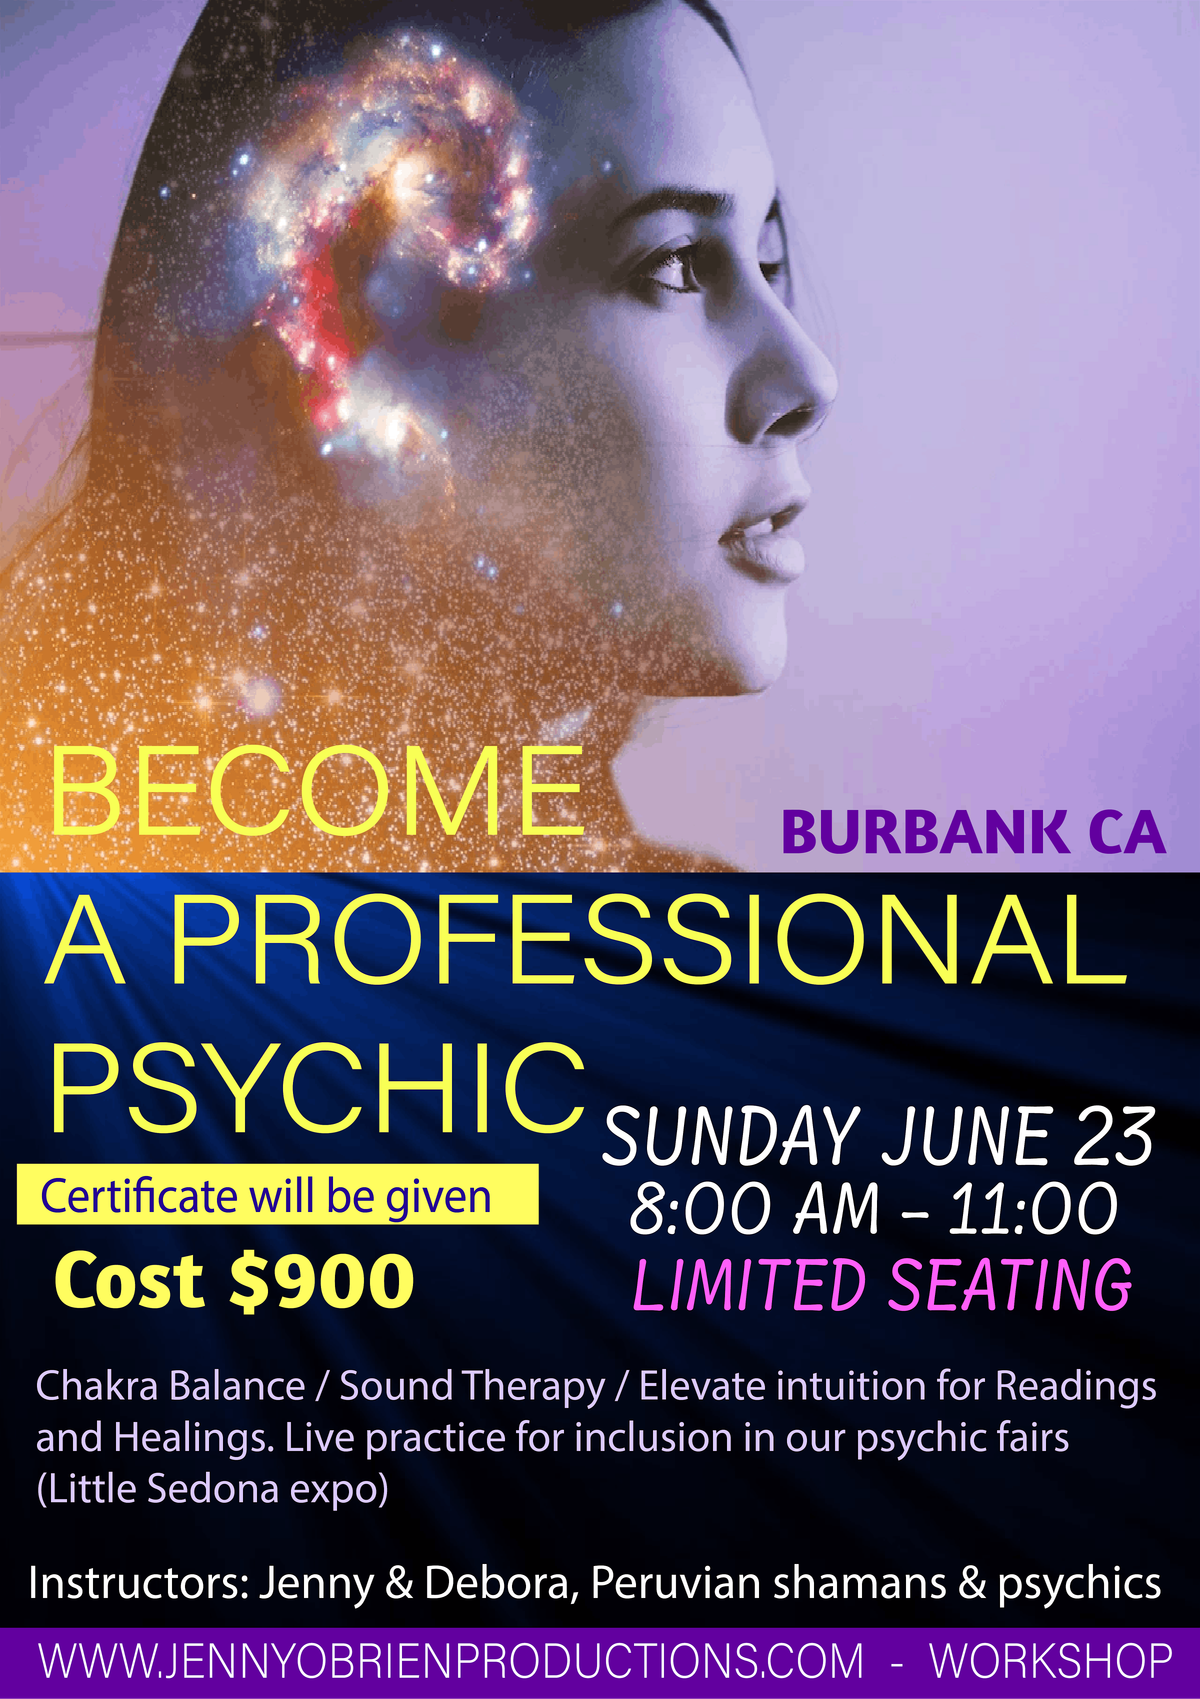 BURBANK- Workshop BECOME a professional Psychic